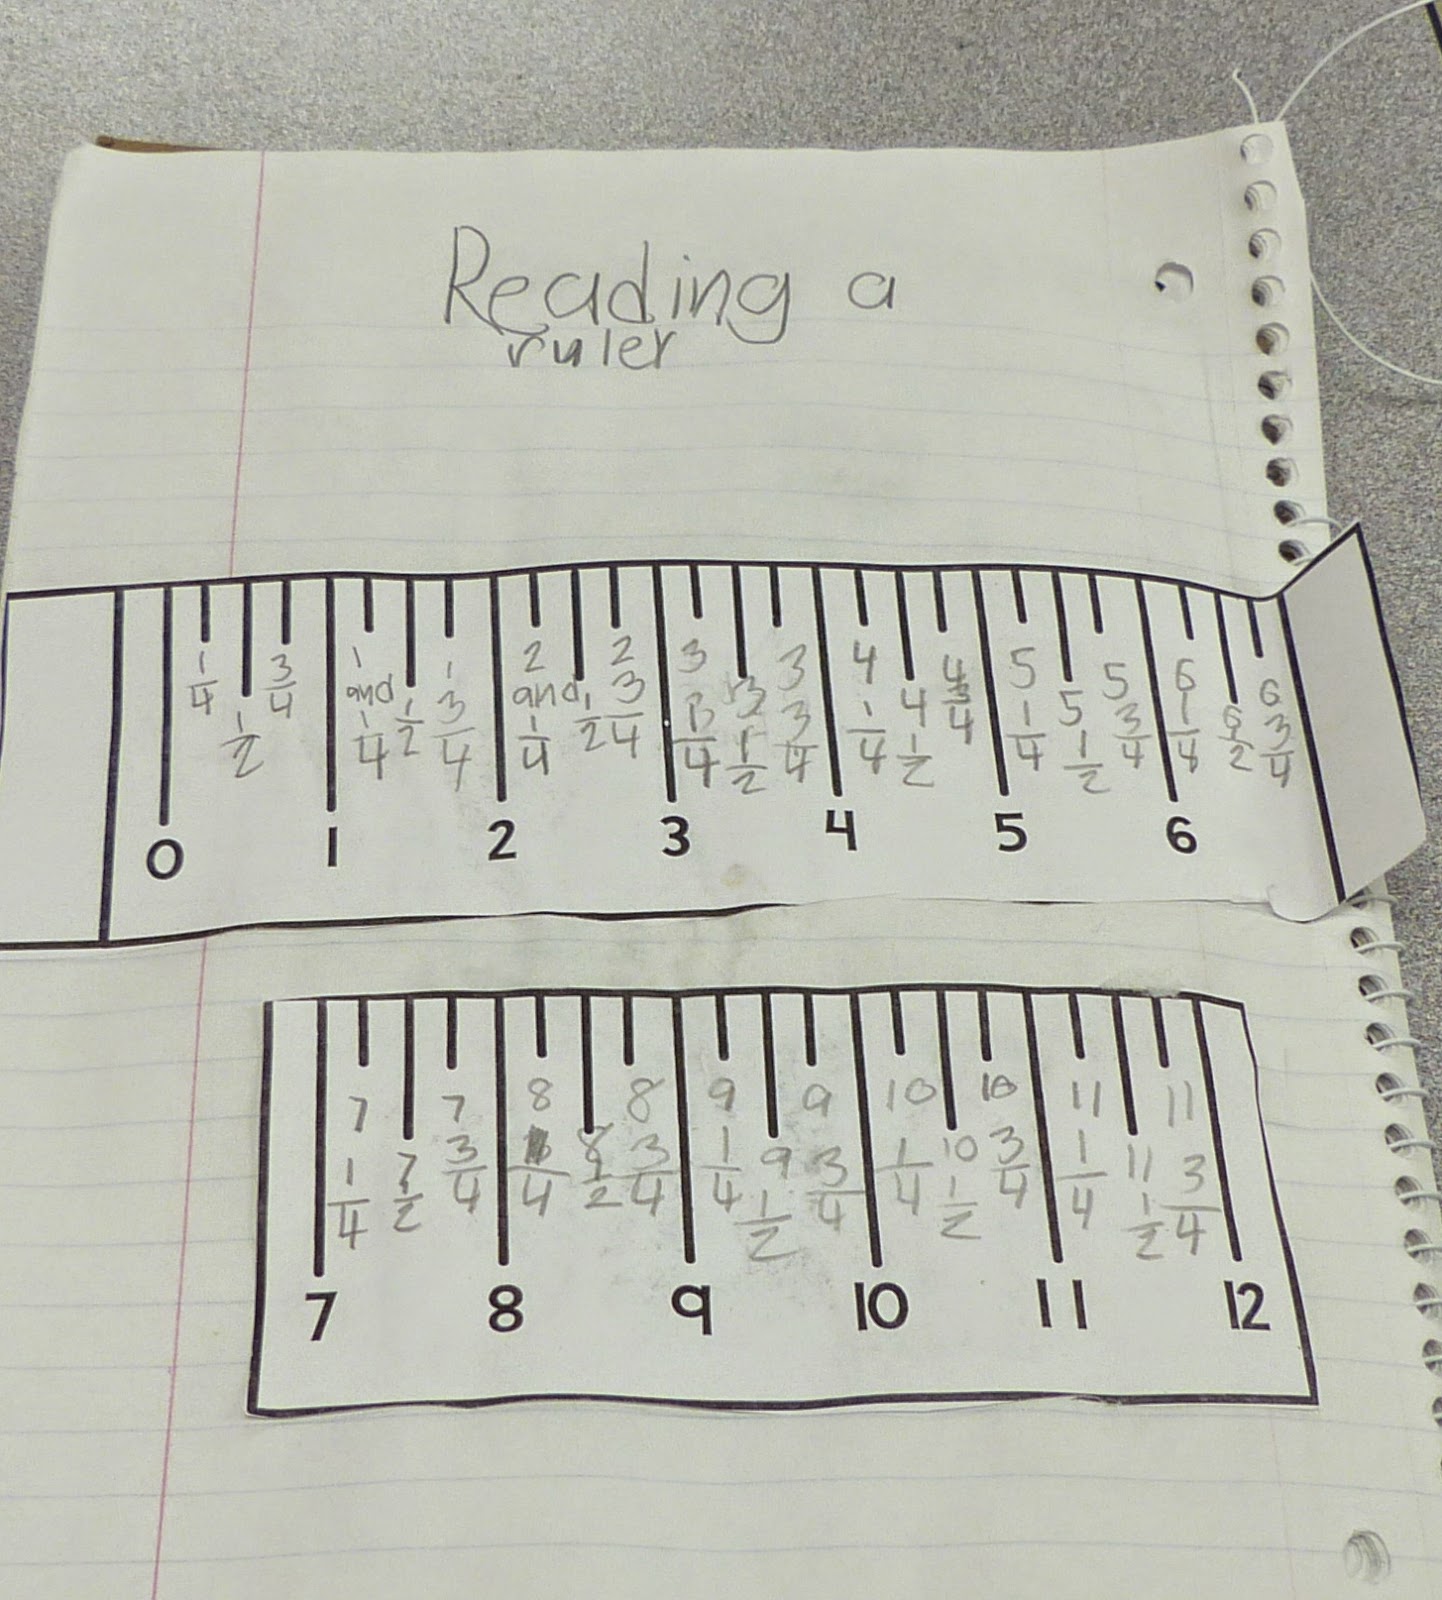 Labeling Fractions On A Ruler Worksheet - measuring in inches using the